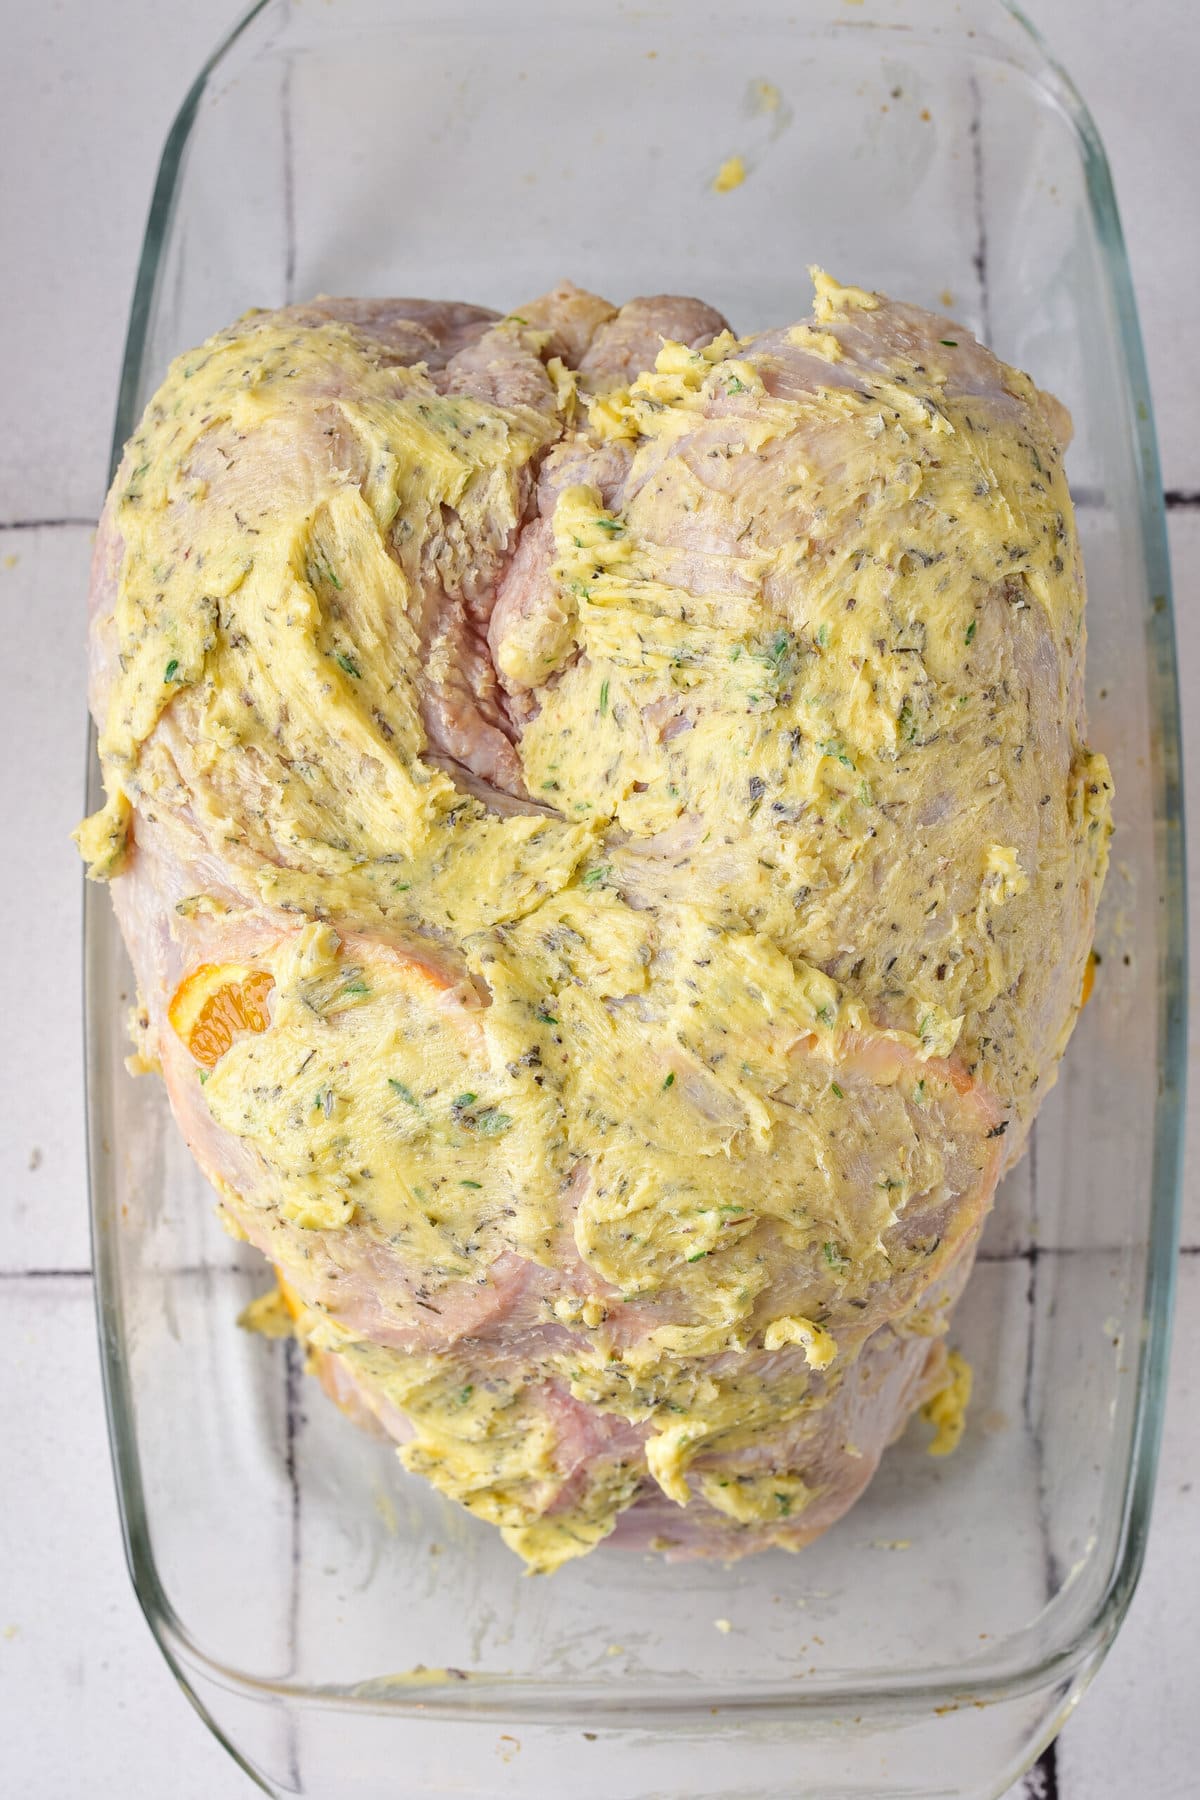 The turkey covered in butter.